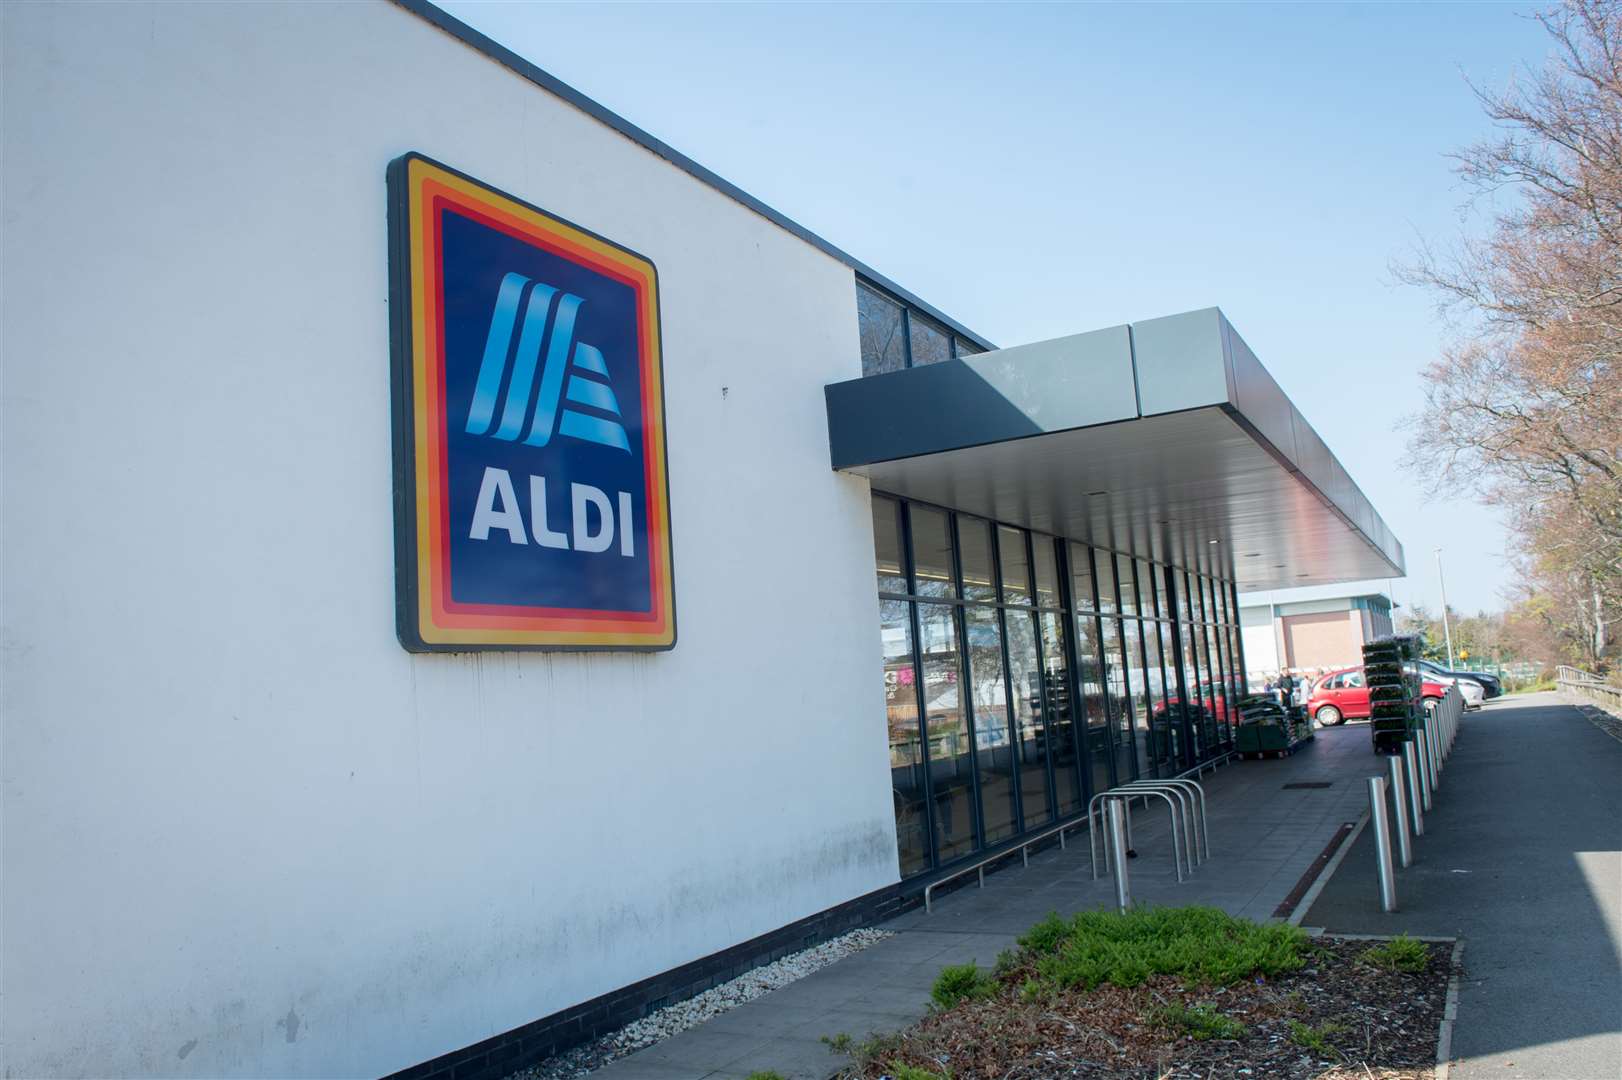 The Aldi Supermarket at Inshes.